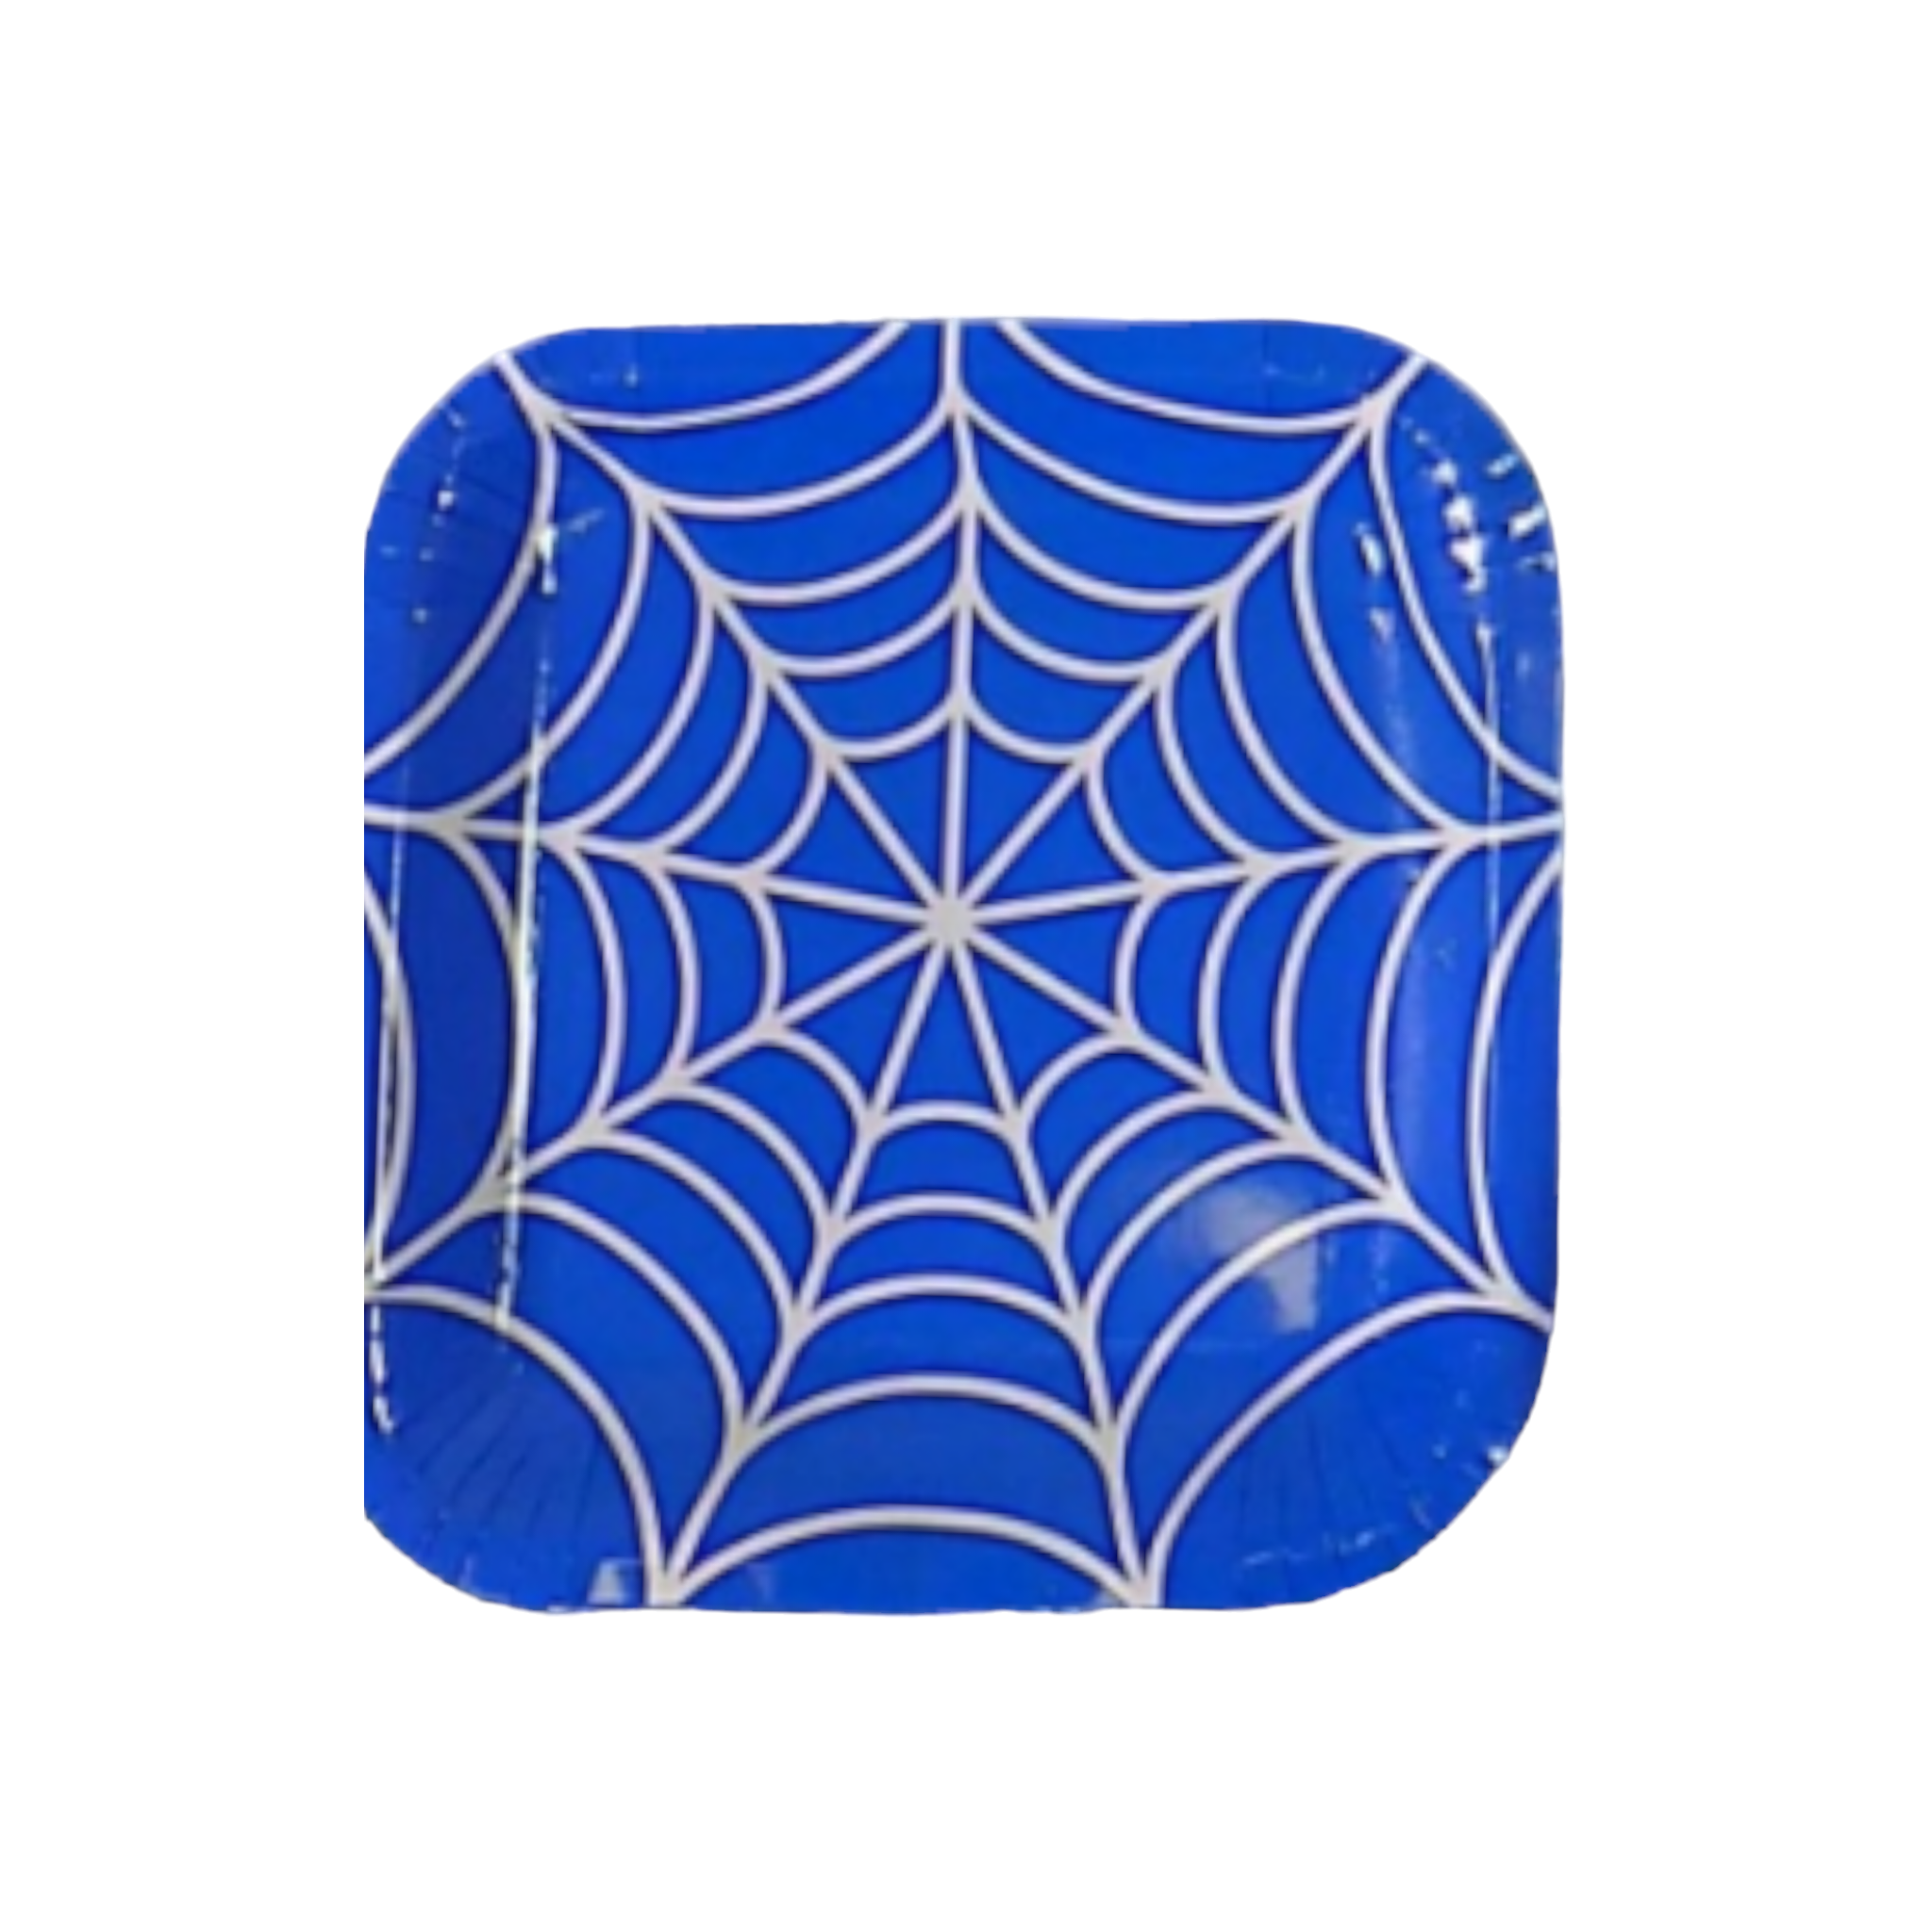 Disney Spiderman Party Paper Plate Square Blue 9inch 10pack